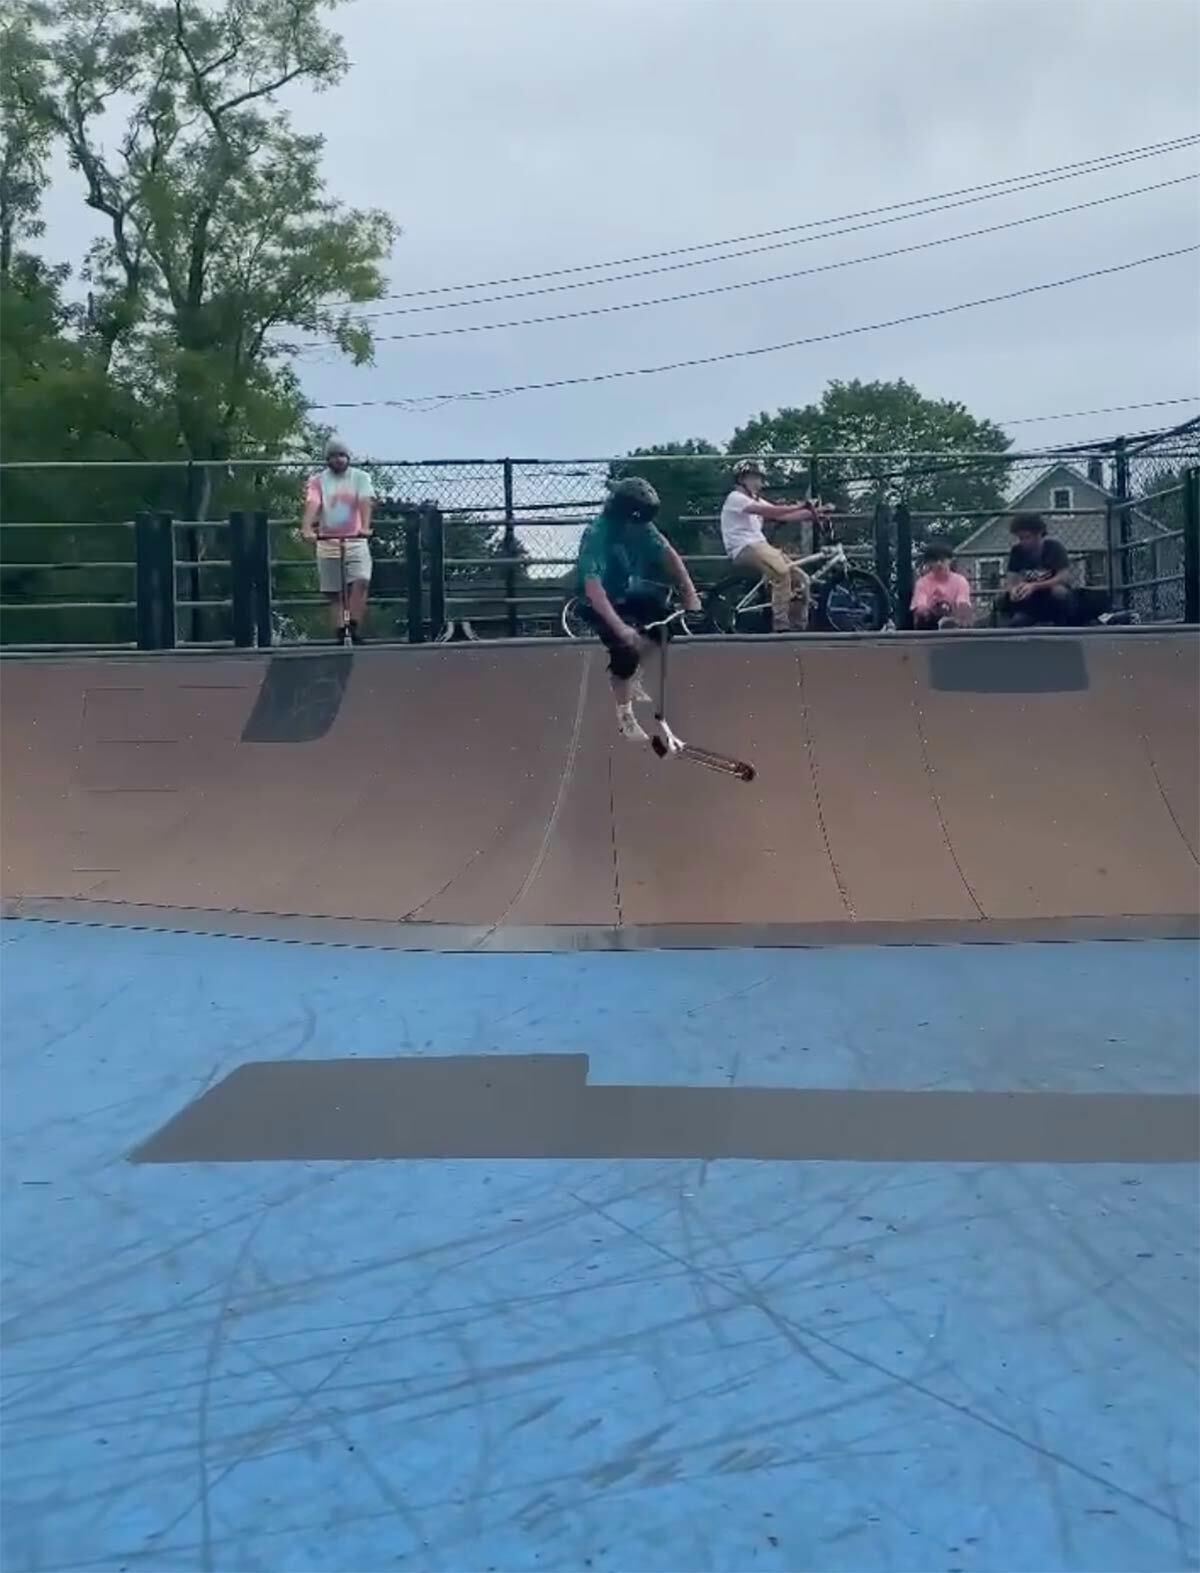 Nicholas Woodworth, affectionately known as “Blueberey,” at the Greenlawn Skate Park, where he was a regular. Image via Instagram